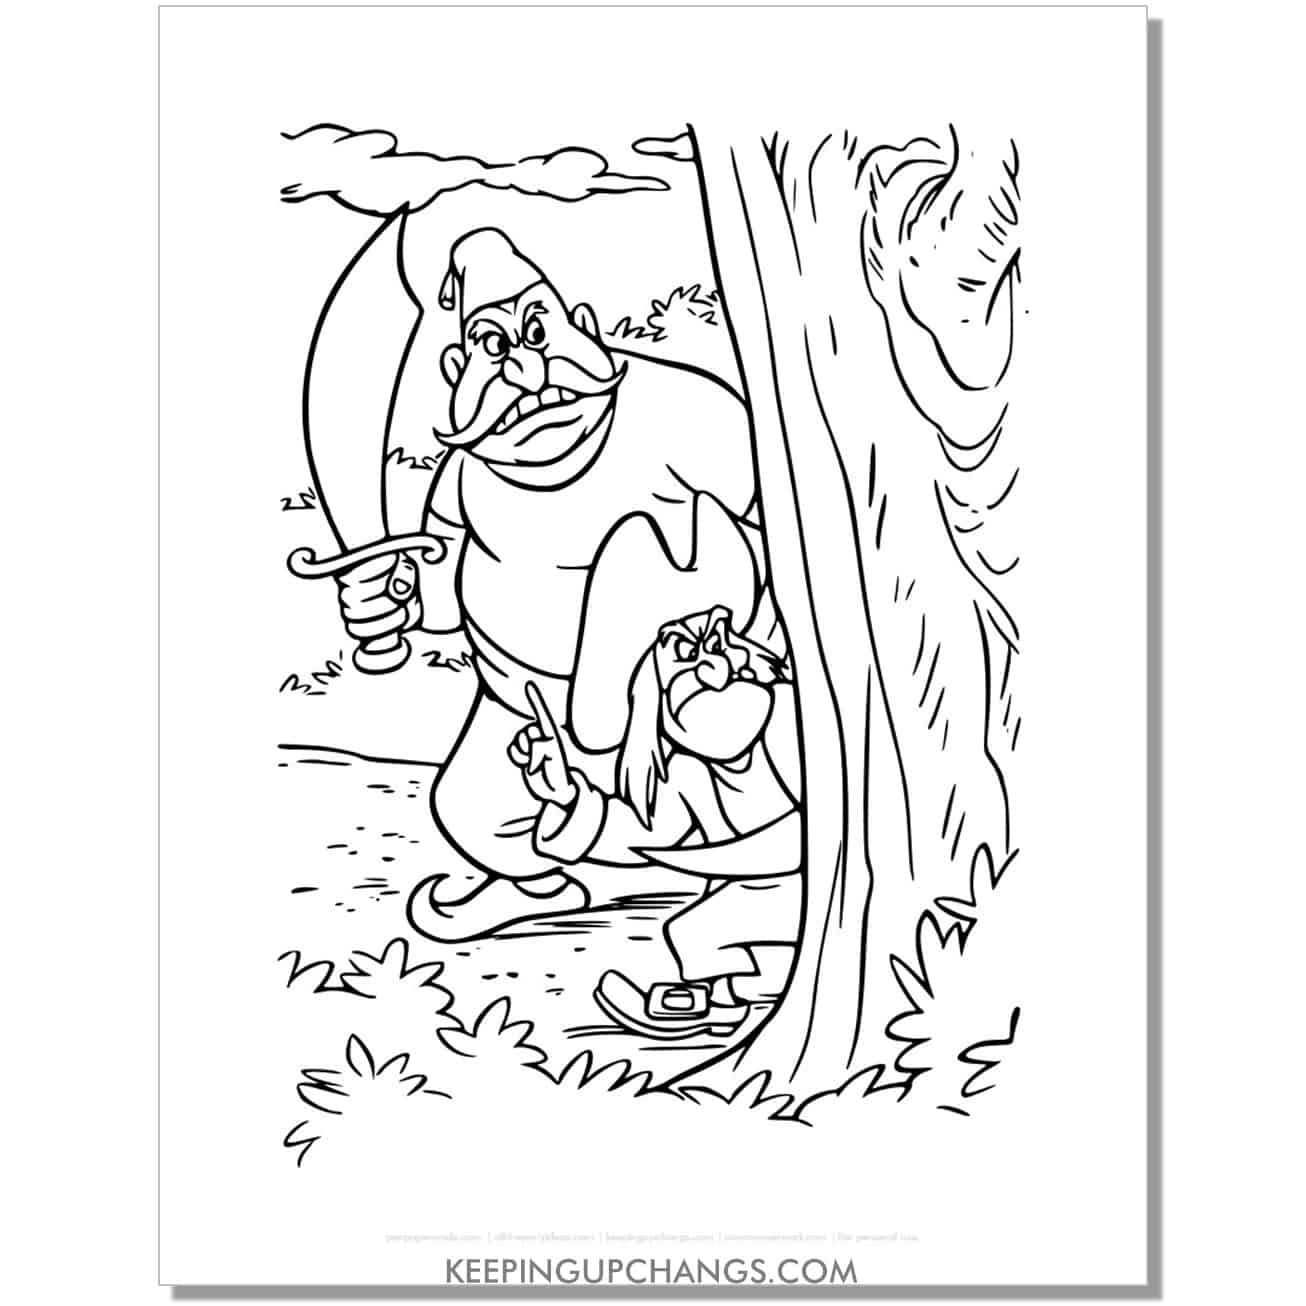 mean pirates of neverland coloring page, sheet.